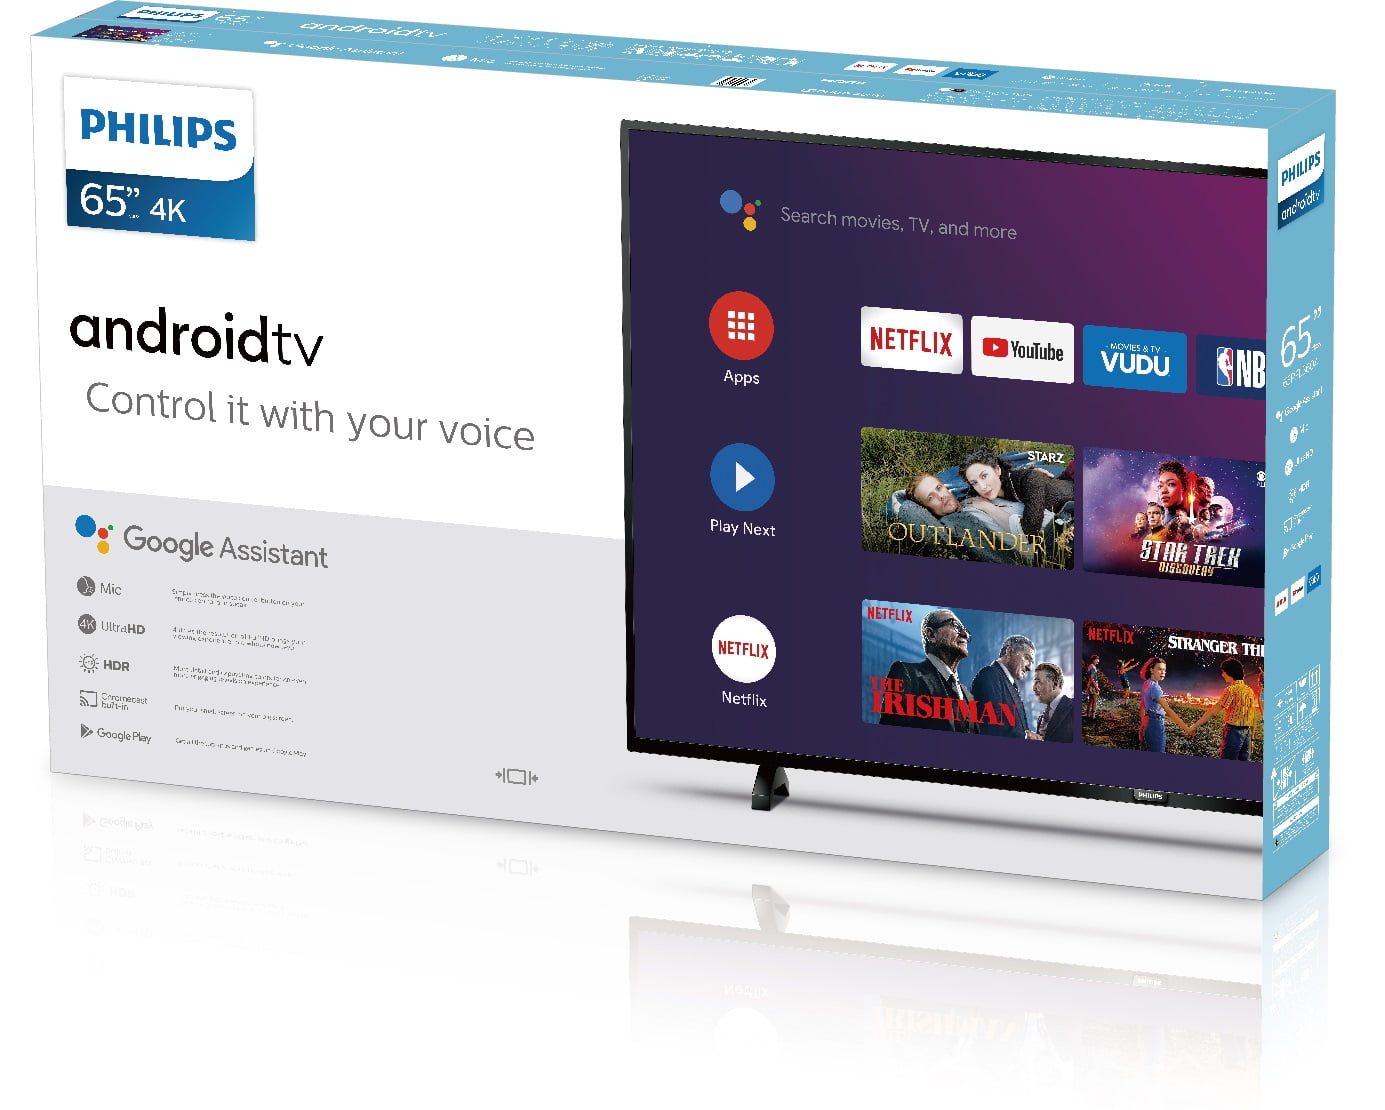 Philips Android TV 65. Philips Android TV. Гугл филипс